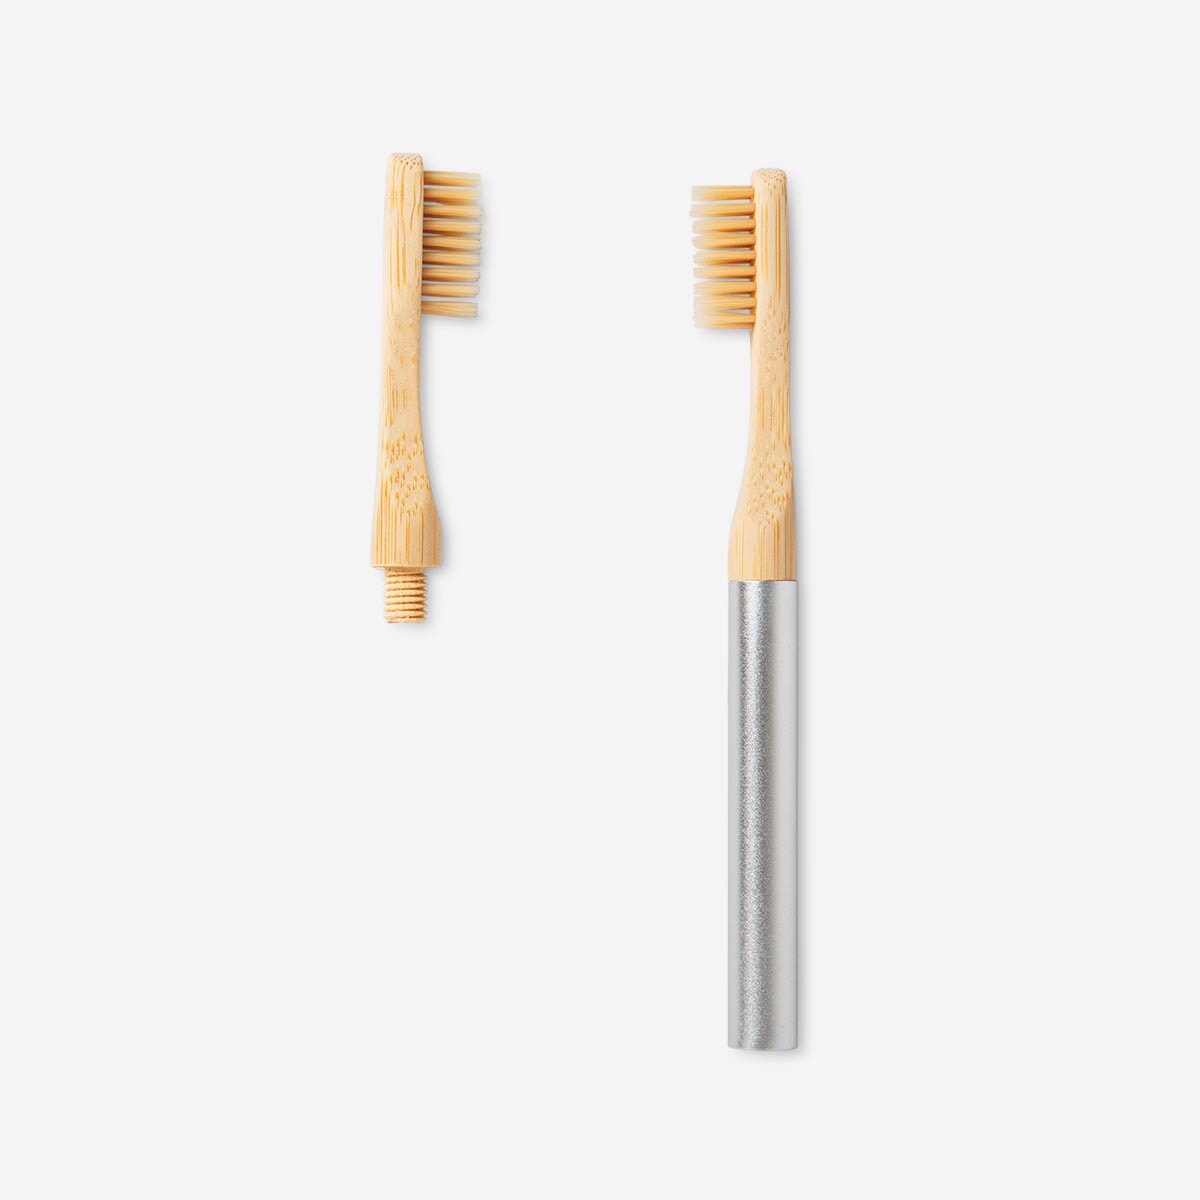 Tootbrush. With replaceable brush heads Personal care Flying Tiger Copenhagen 